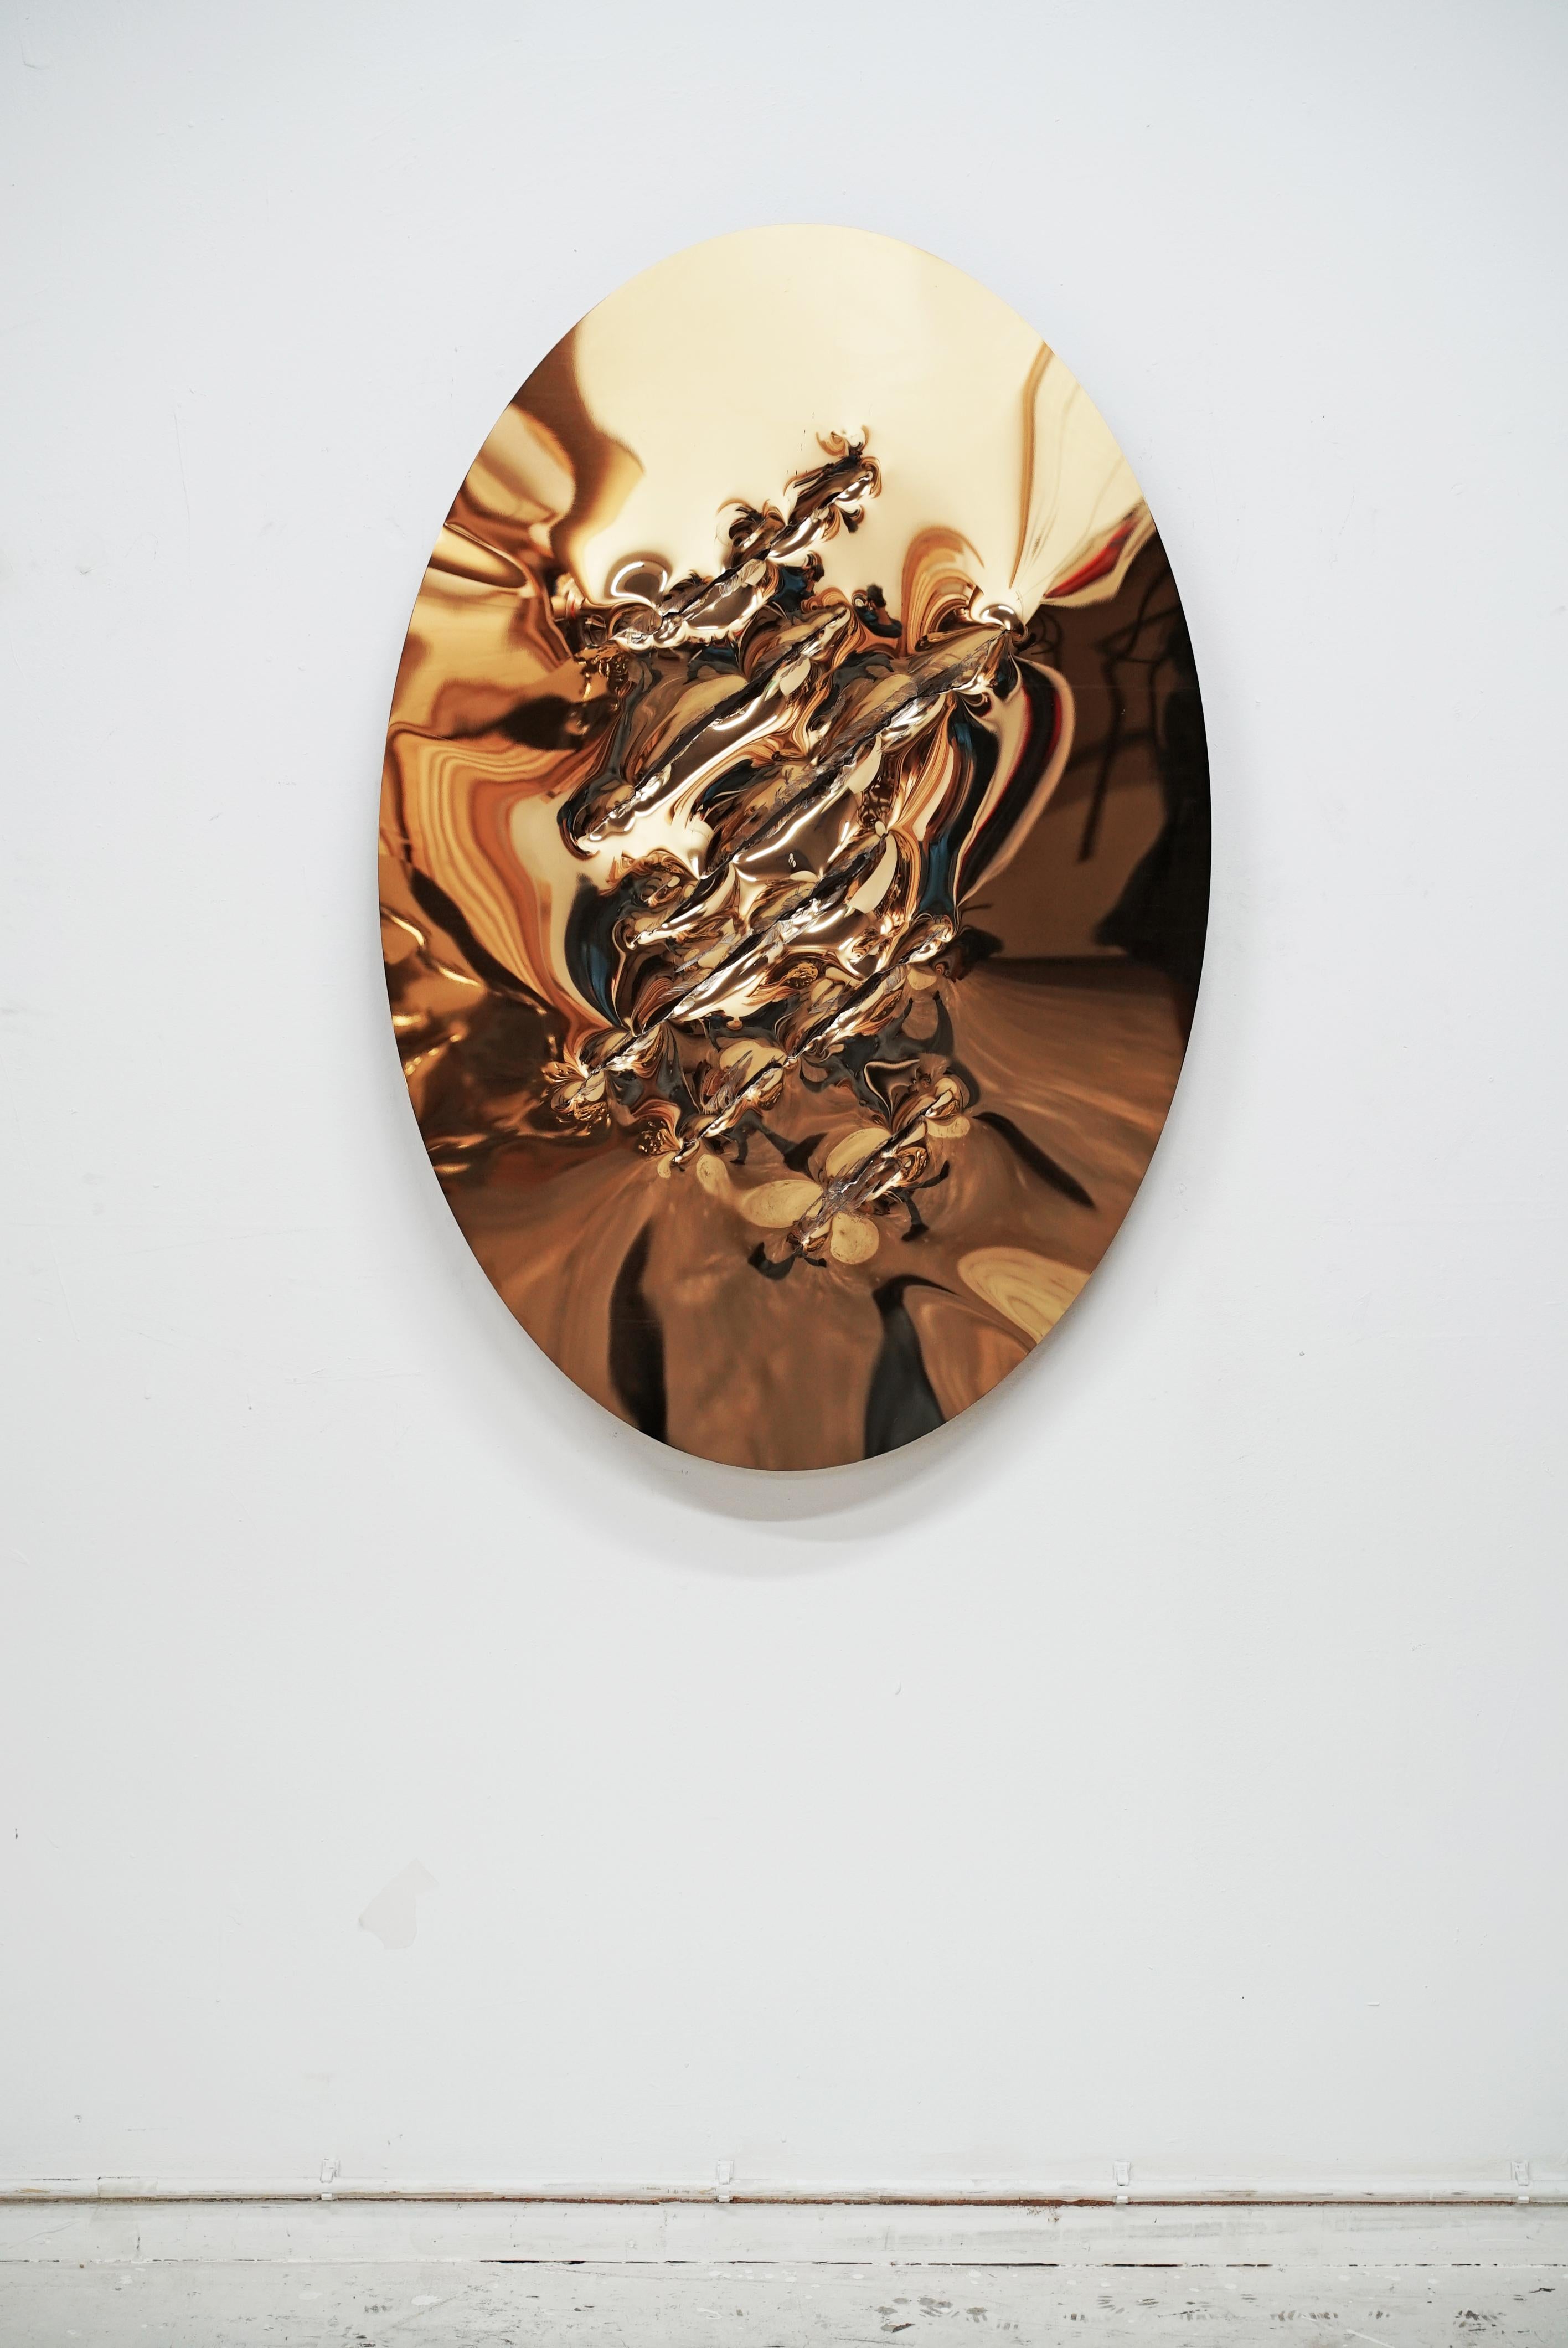 Shiny oval steel artwork with golden mirrored surface with ax cuts 120 x 60 cm - Sculpture by John Franzen